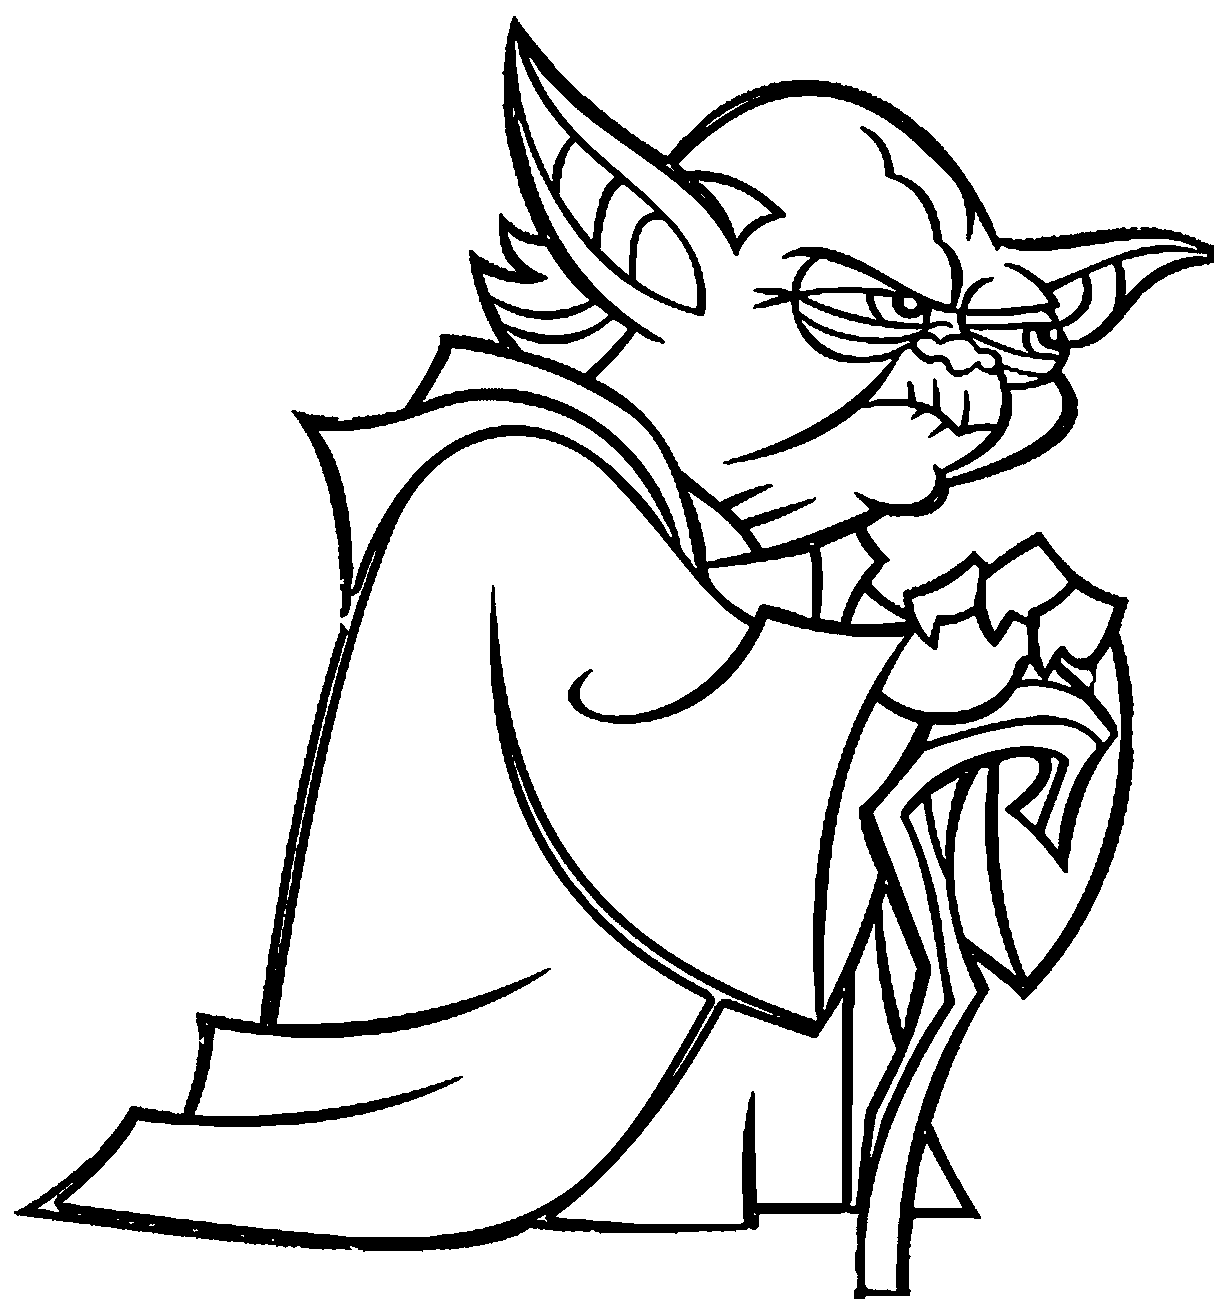 Yoda Coloring Pages Best Coloring Pages For Kids